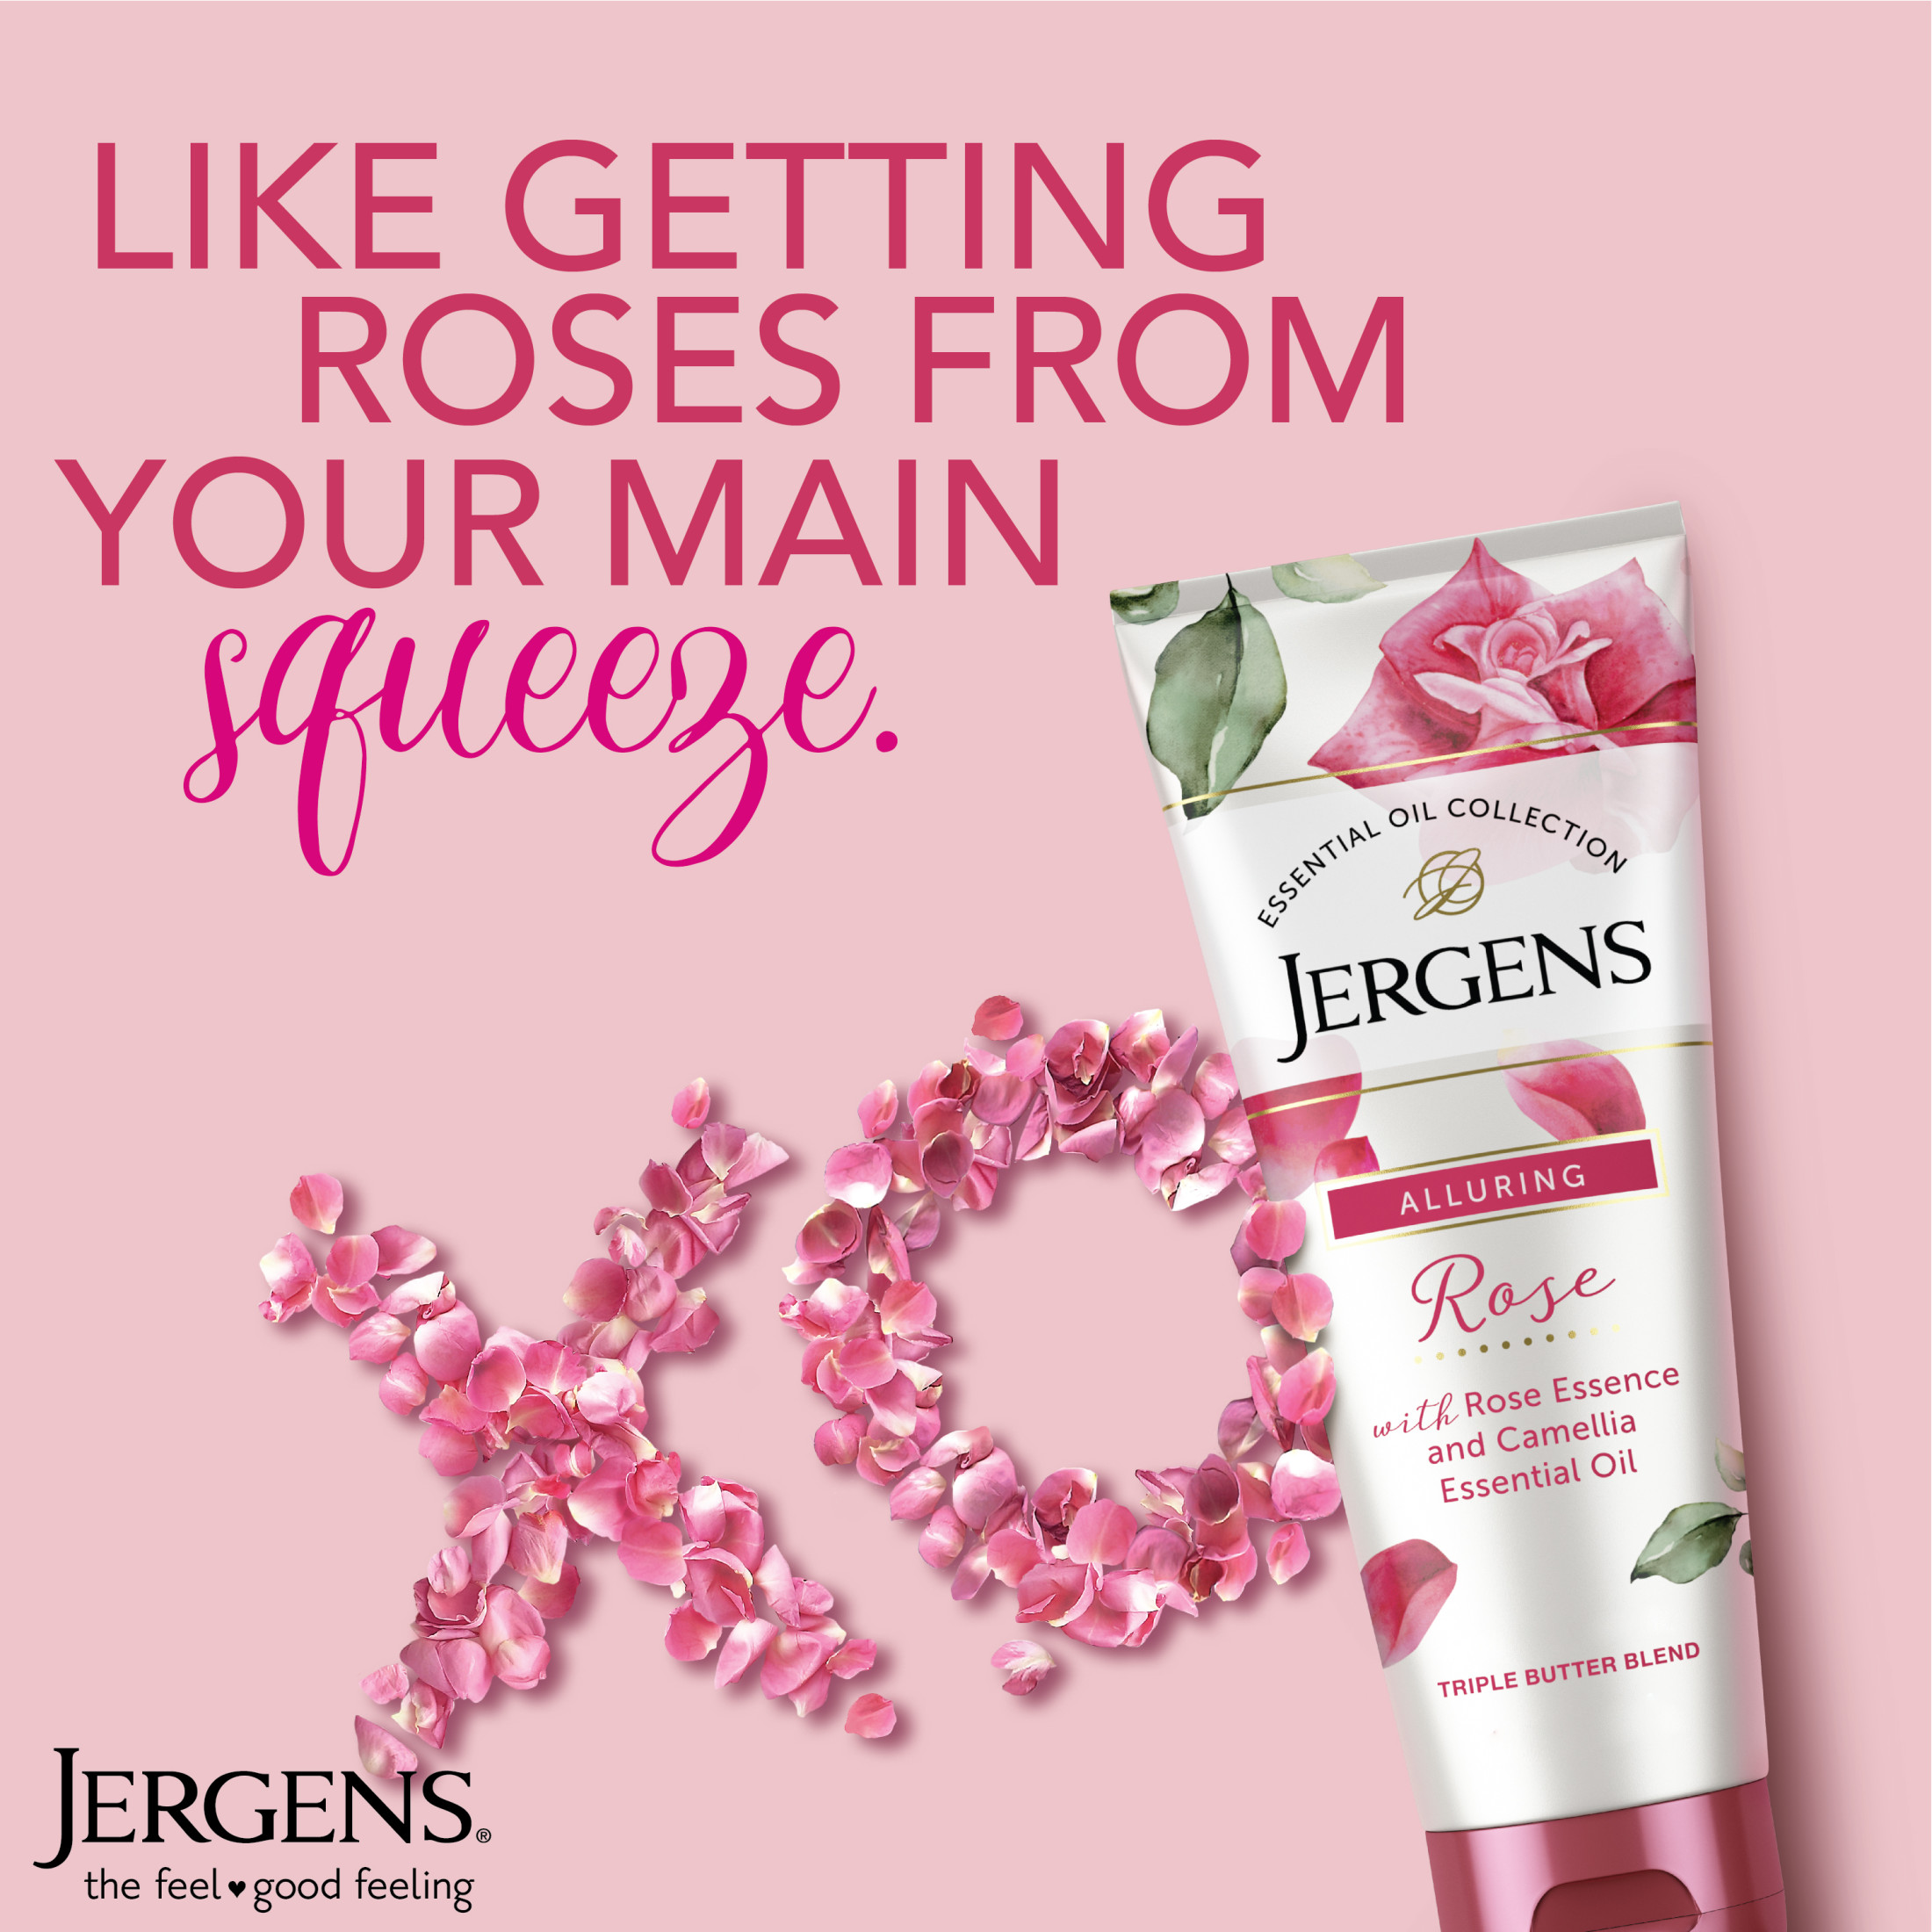 Jergens Rose Body Butter, Lotion With Camellia Essential Oil, Moisturizer, 7 Oz - image 3 of 10